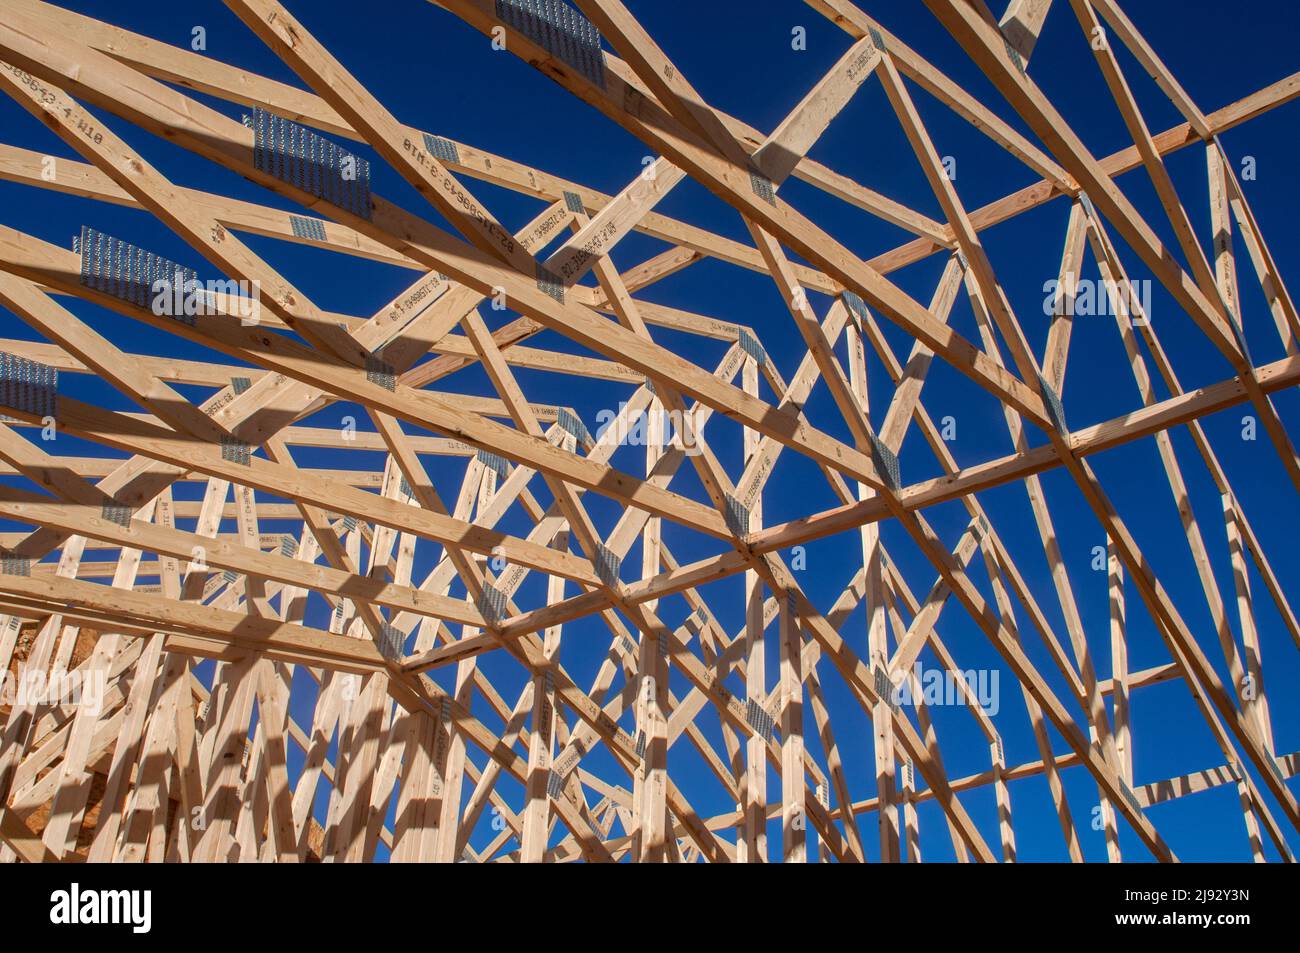 Structural supports and roof trusses of a house under construction. Stock Photo